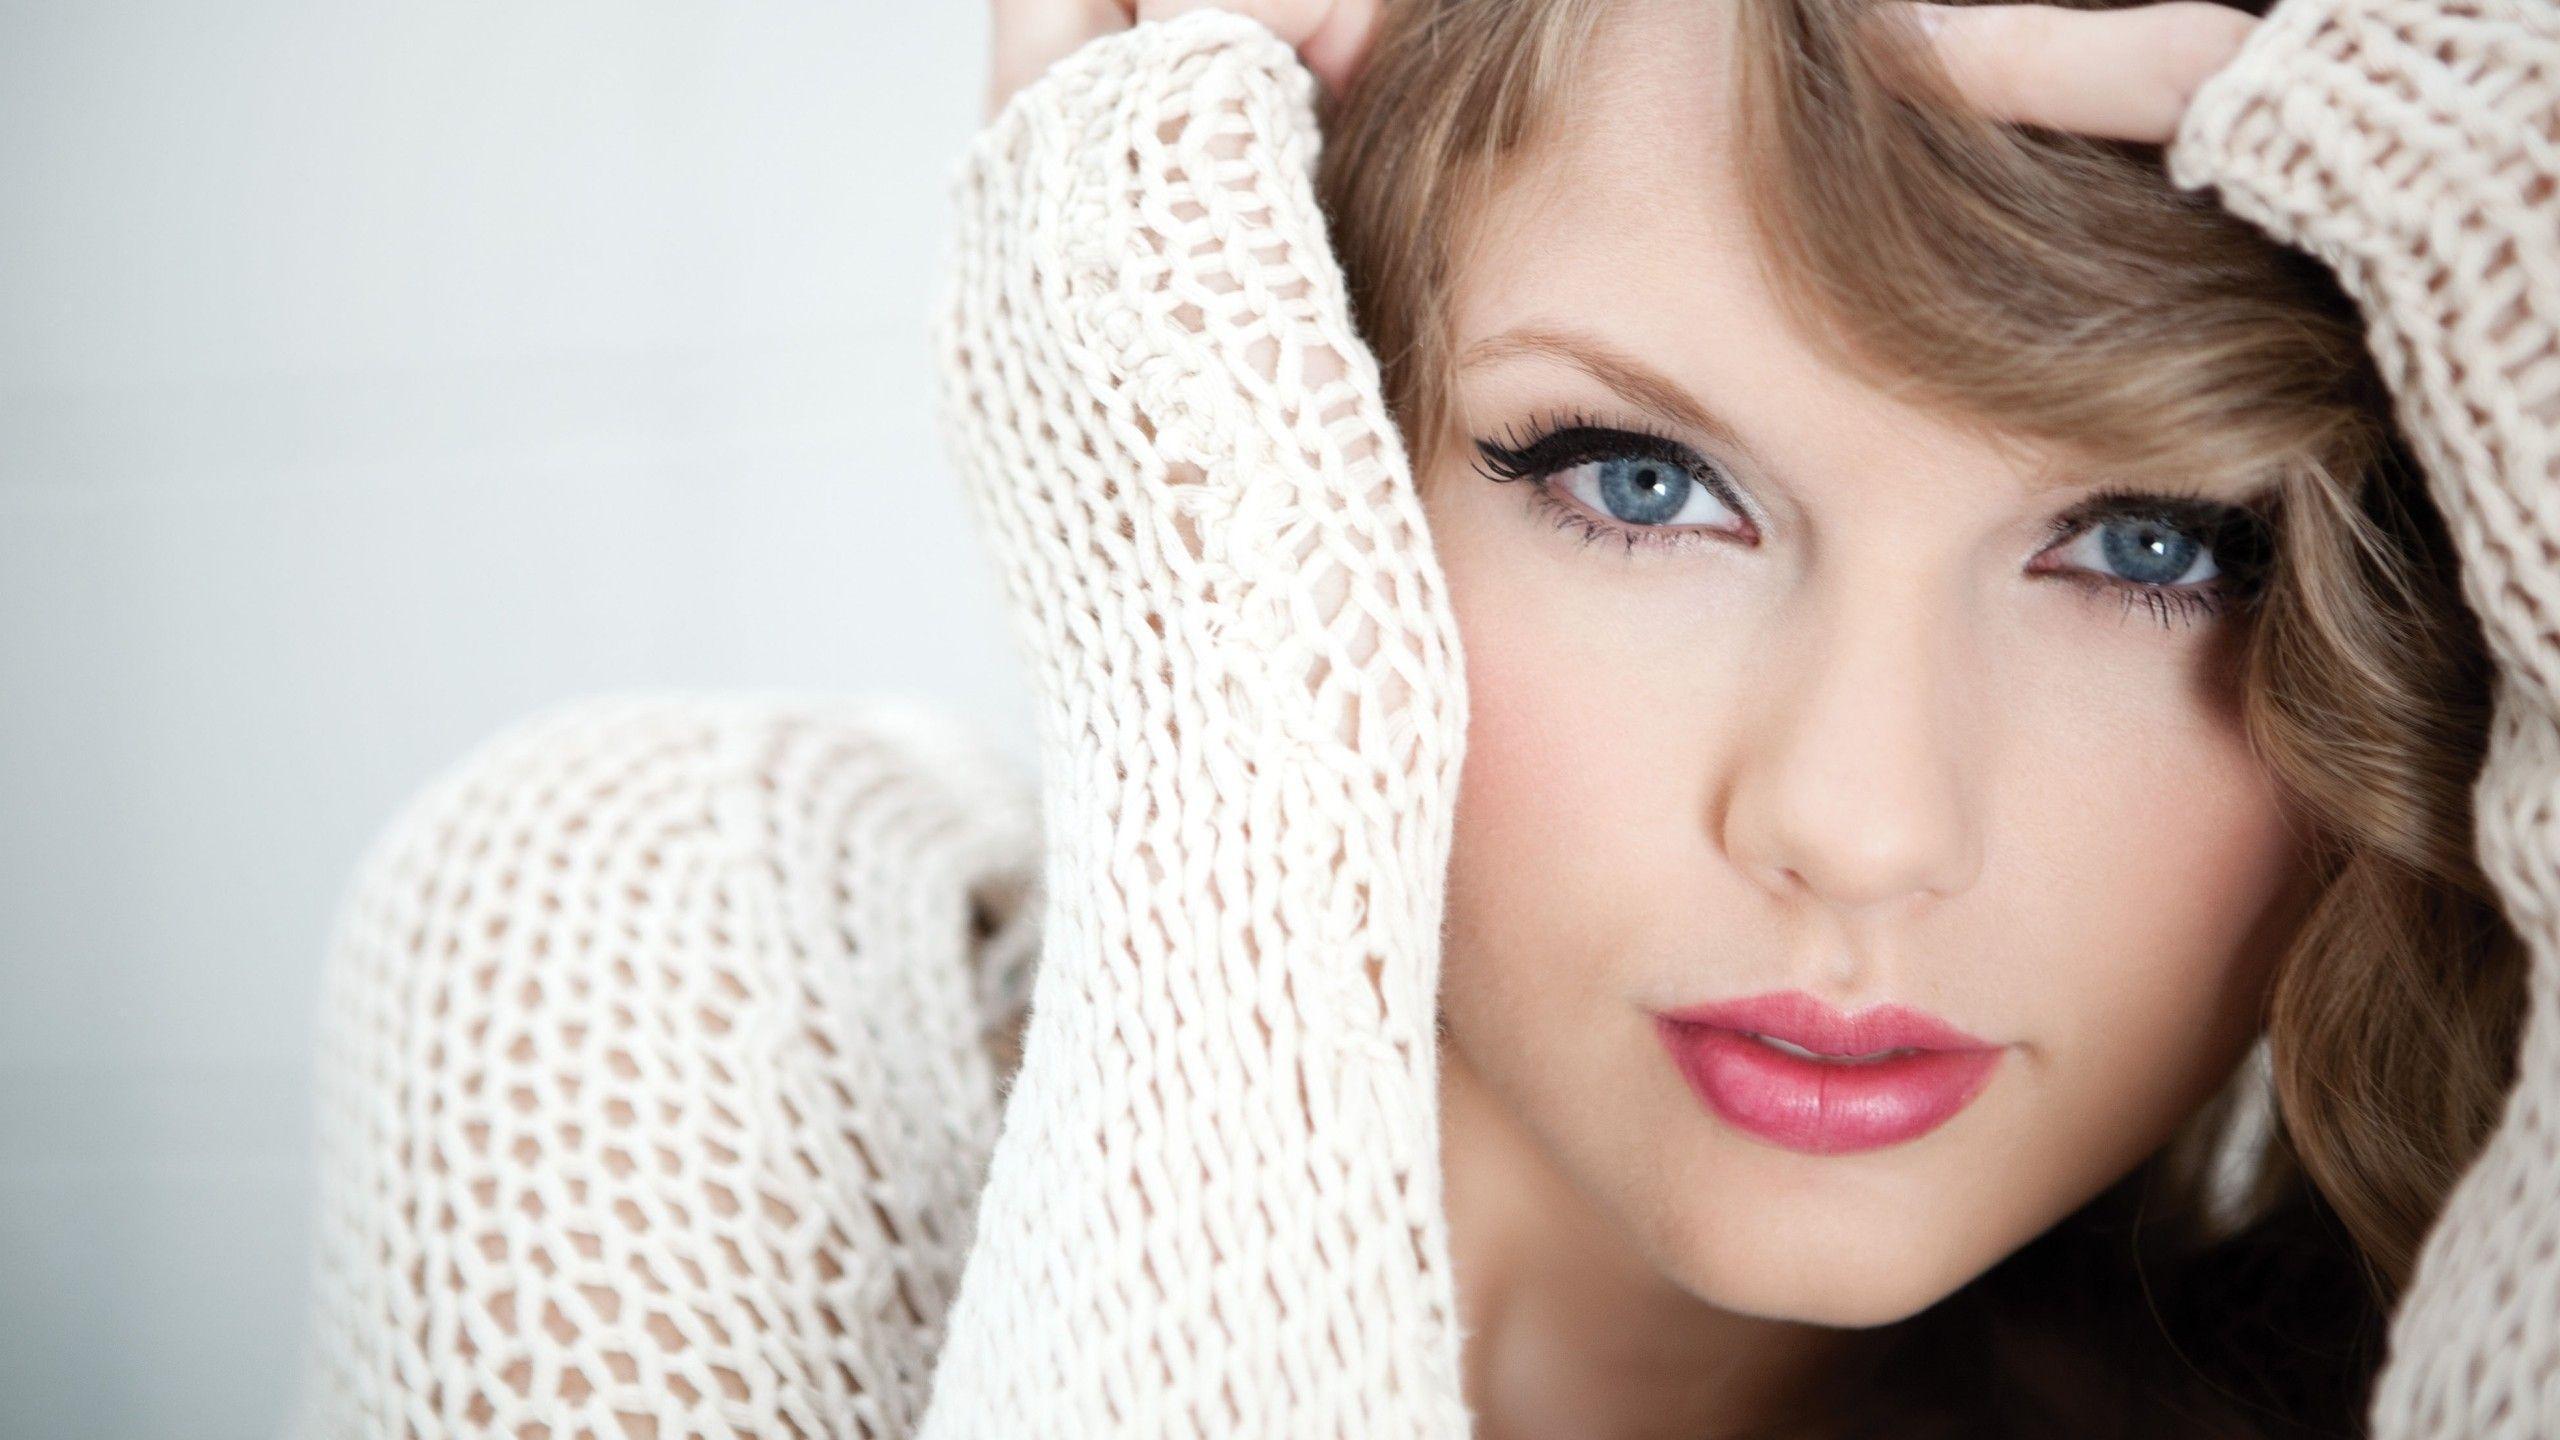 Taylor Swift Wallpaper, Picture, Image